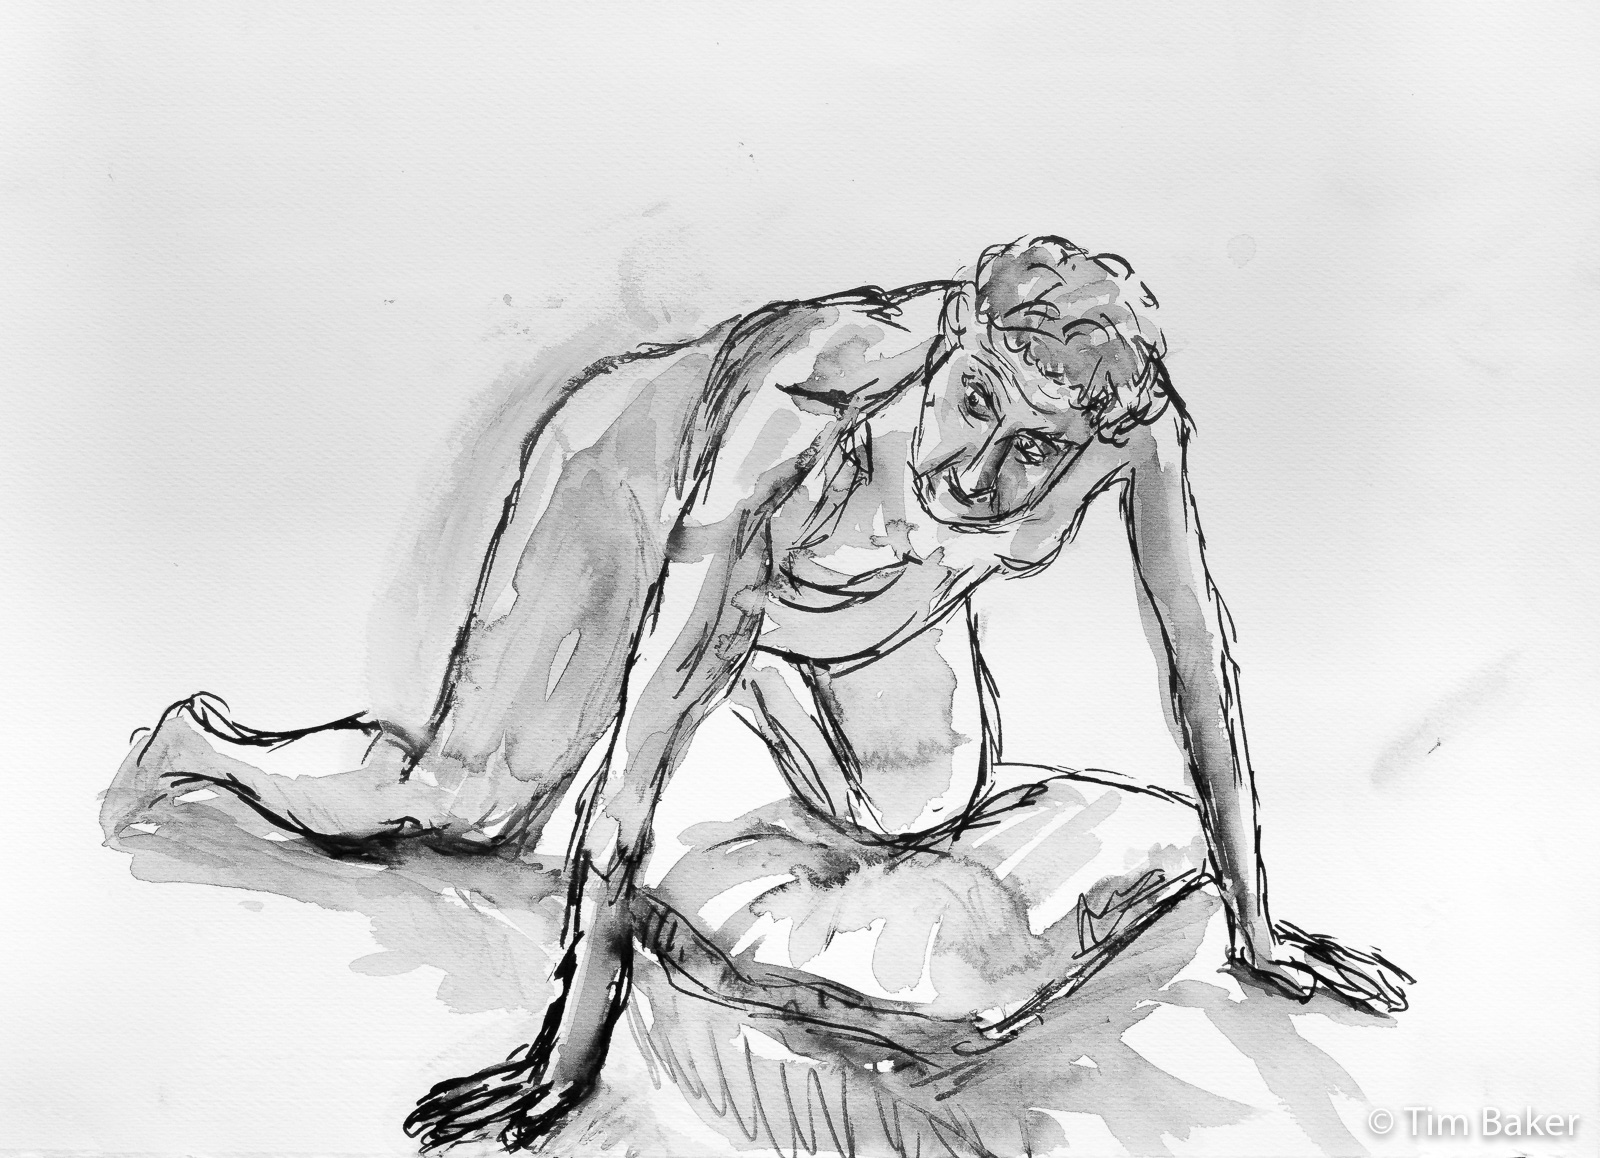 Tim, Life Drawing #66, Brush Pen and Chisel Faber Castell Pitt pen and wash, 35.5x51cm, F5 Fabriano Paper.